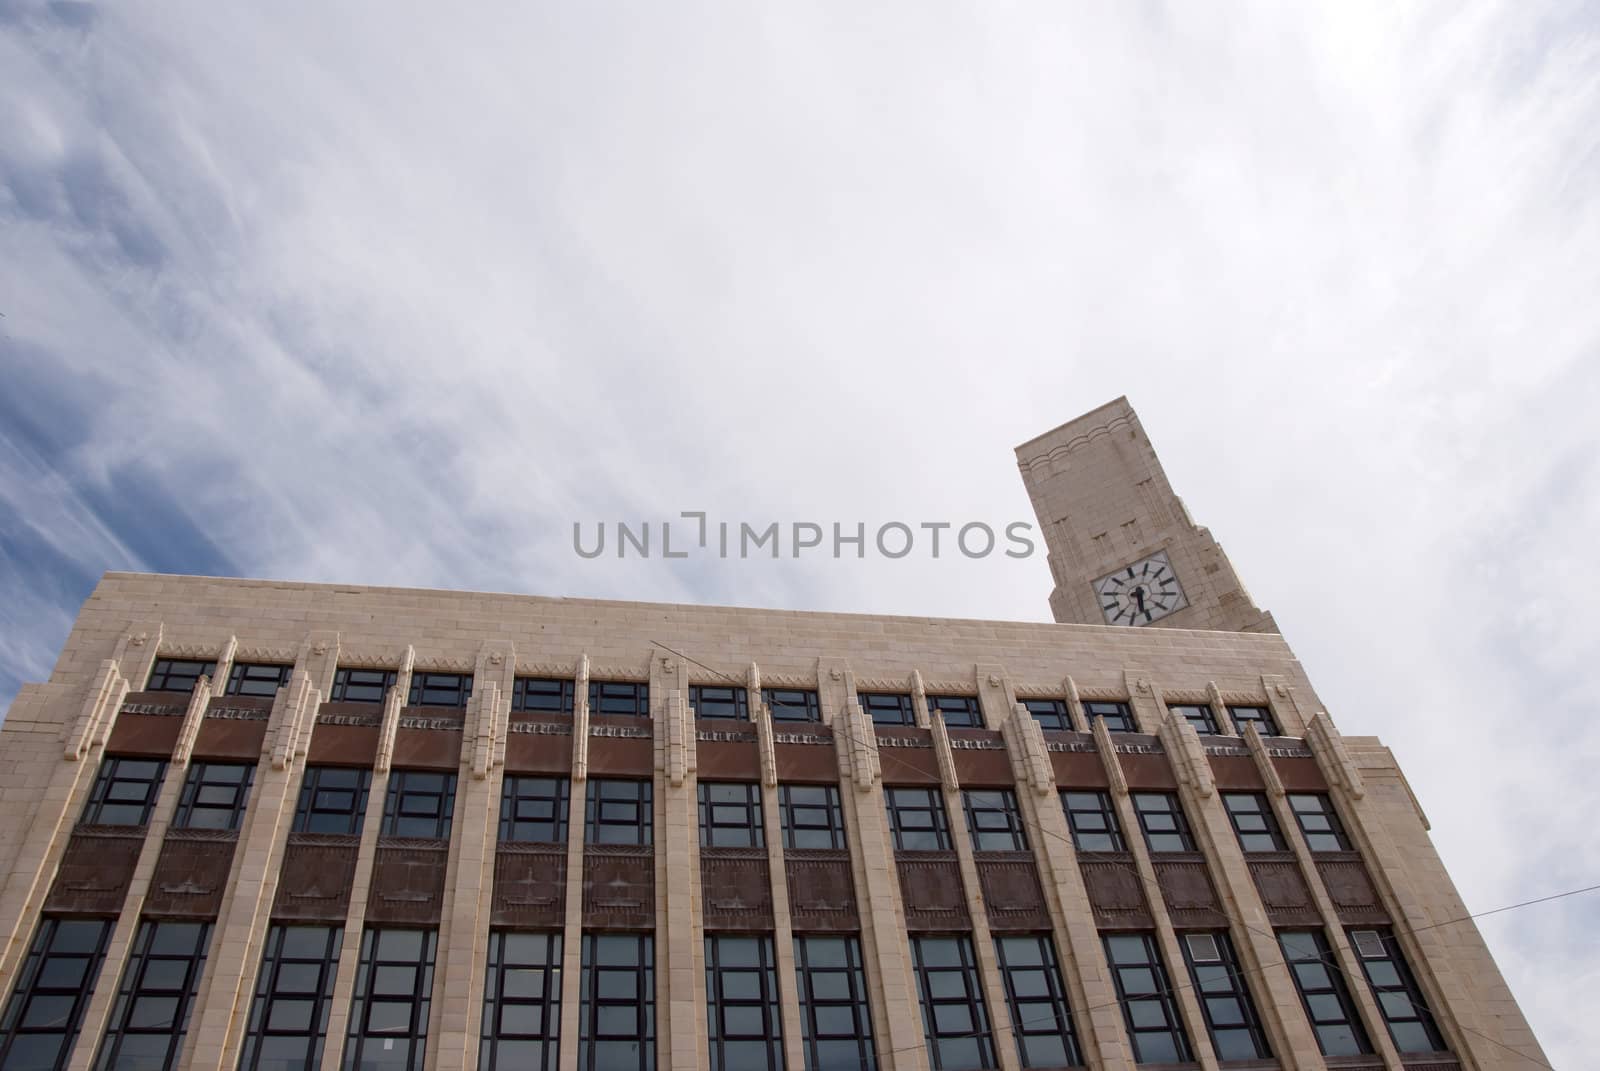 Art Deco Building and Clocktower by d40xboy